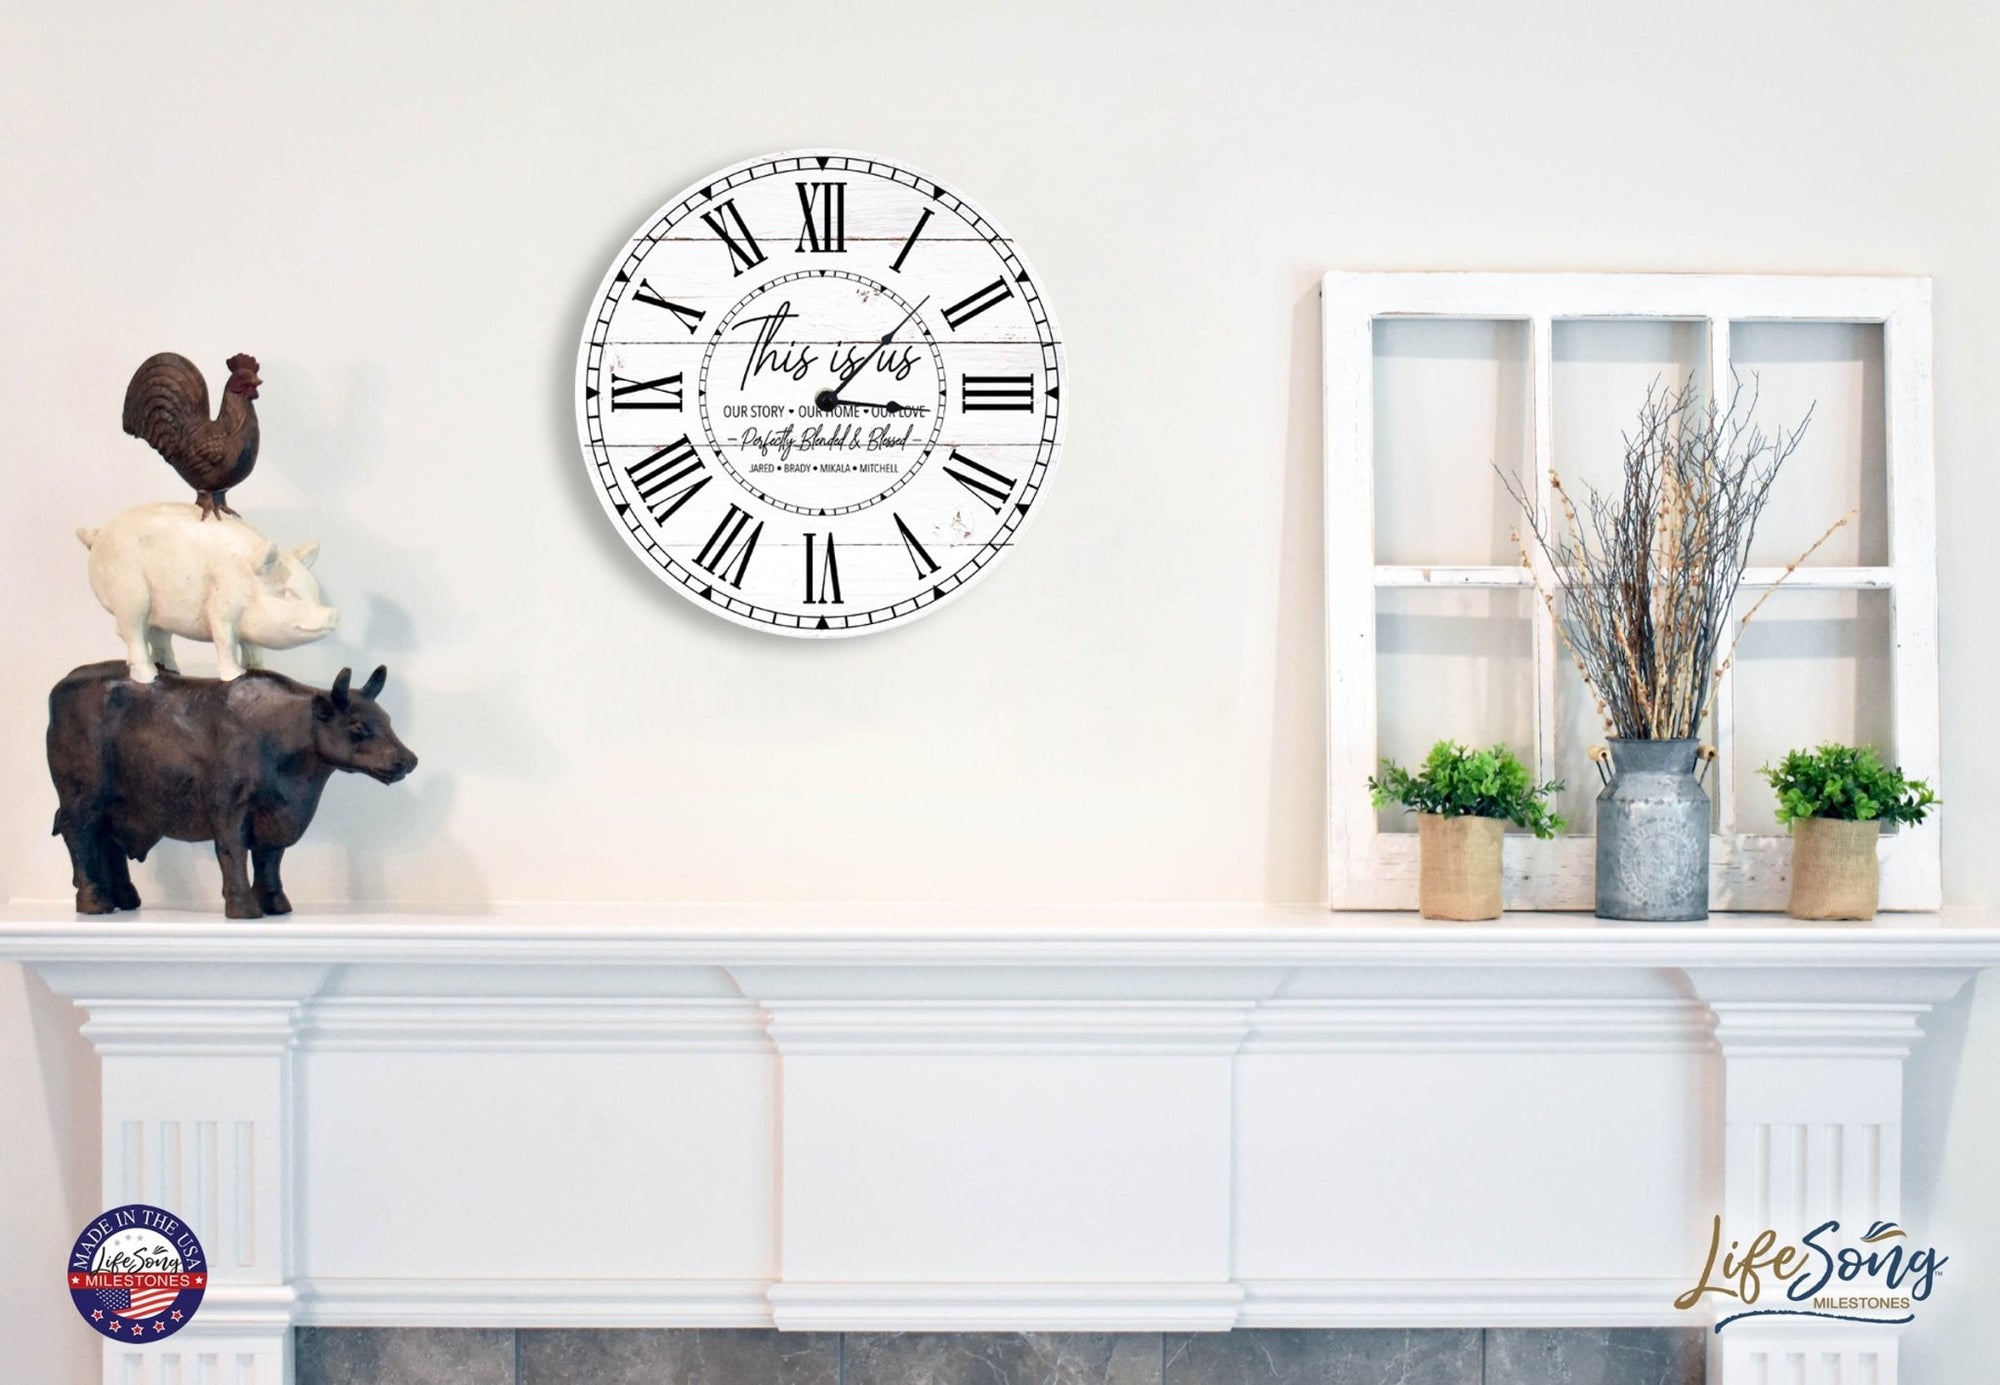 Everyday Home and Family Wall Clock 12” x .125” This Is Us-Perfectly Blended - LifeSong Milestones